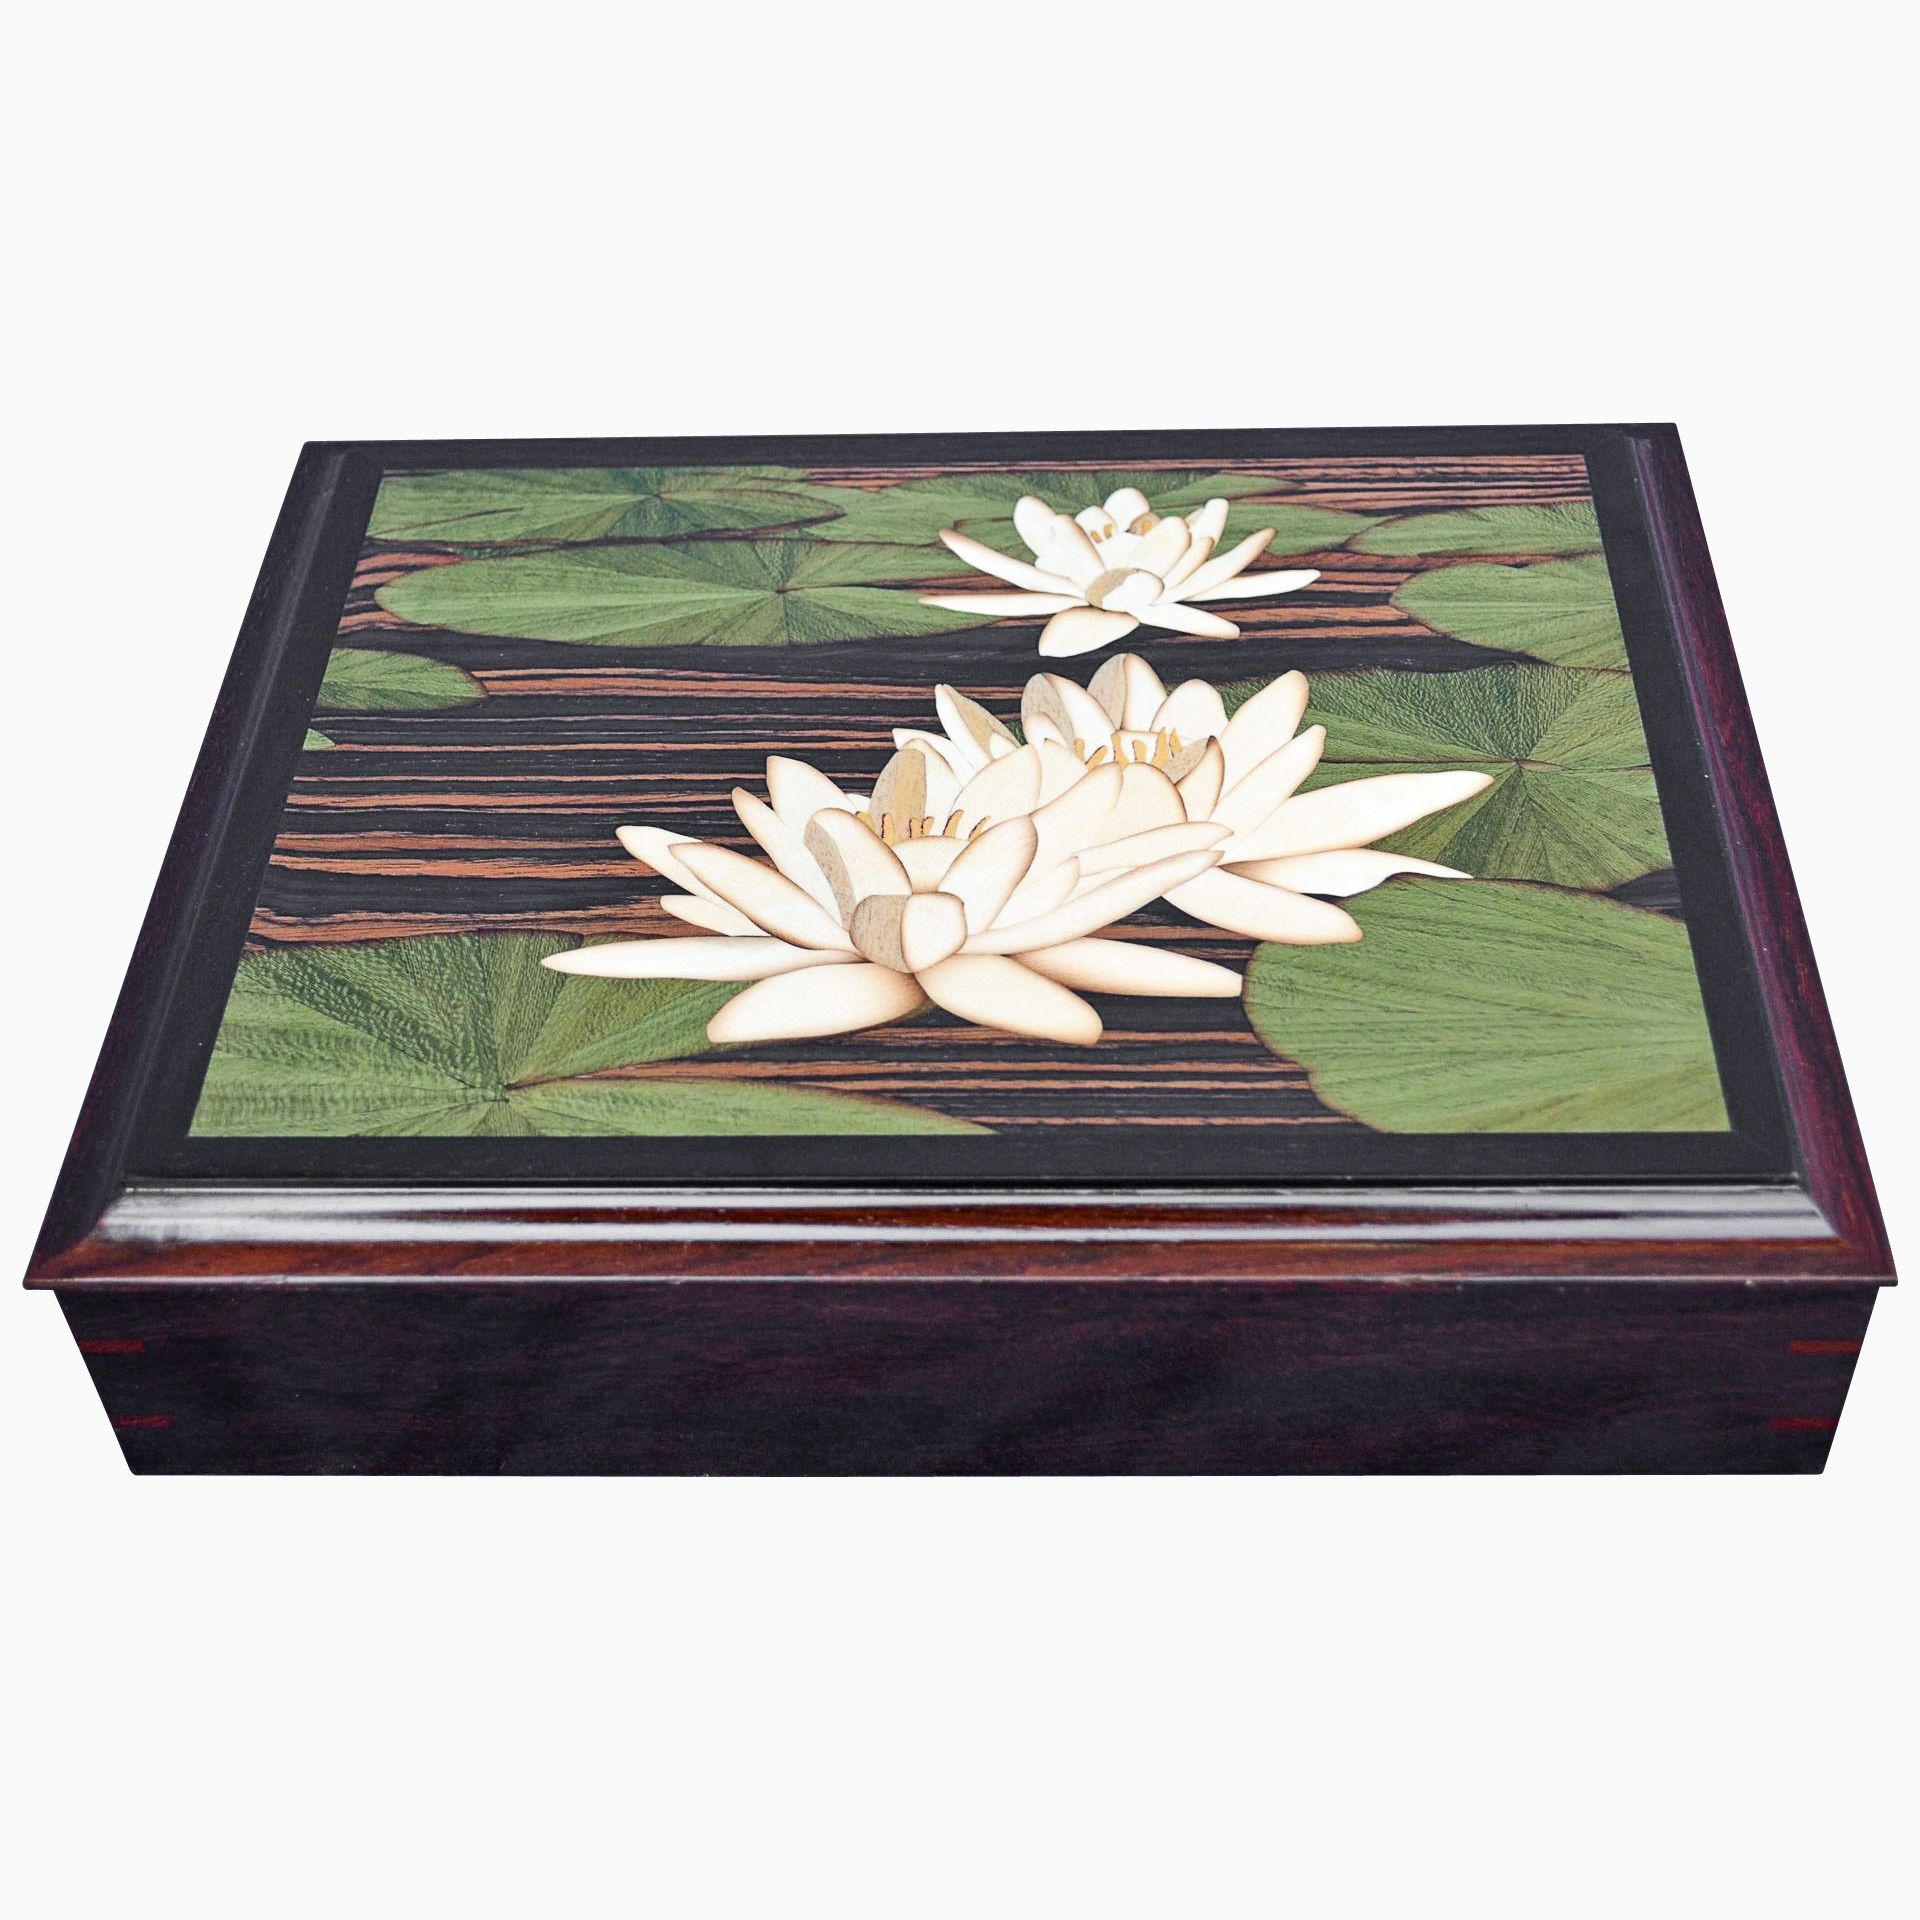 Wooden lotus flower hand painted jewelry box